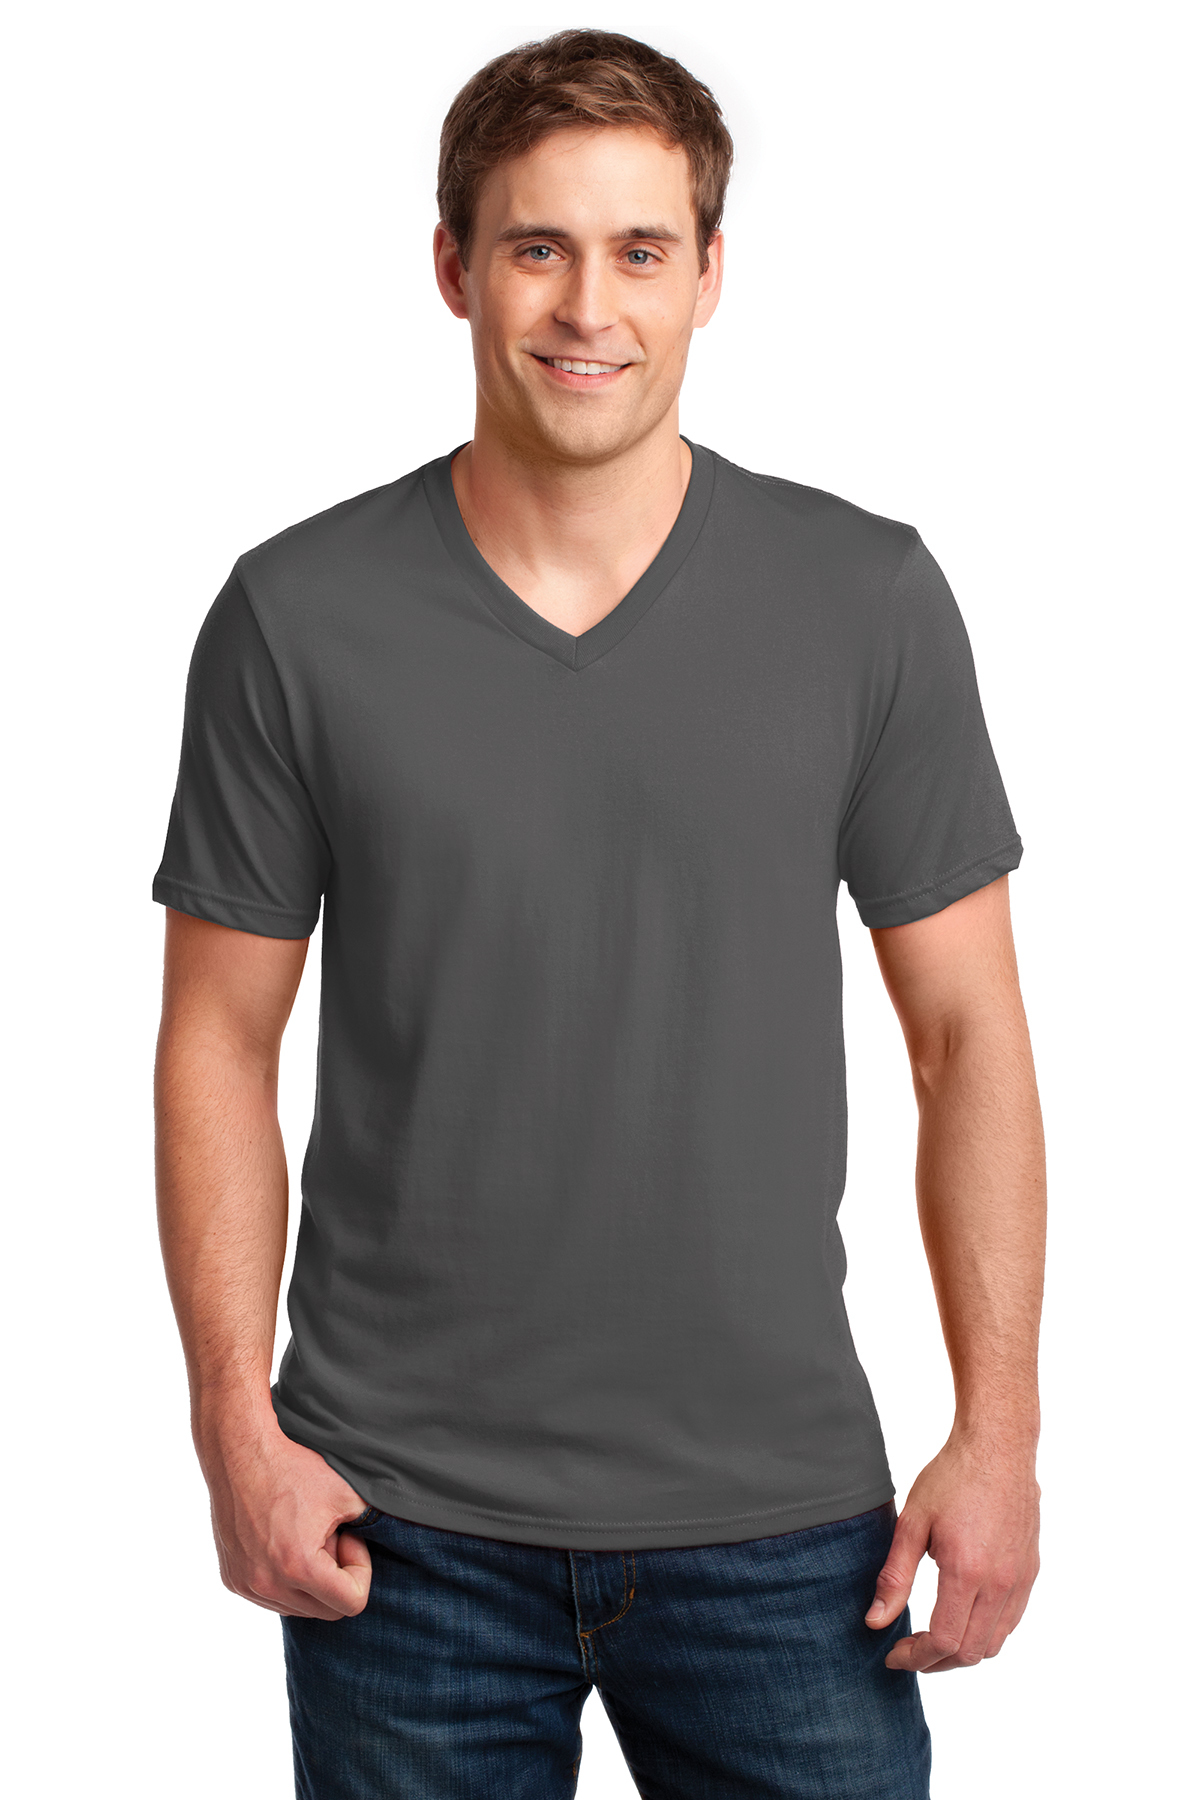 Anvil 100% Combed Ring Spun Cotton V-Neck T-Shirt | Product | Company ...